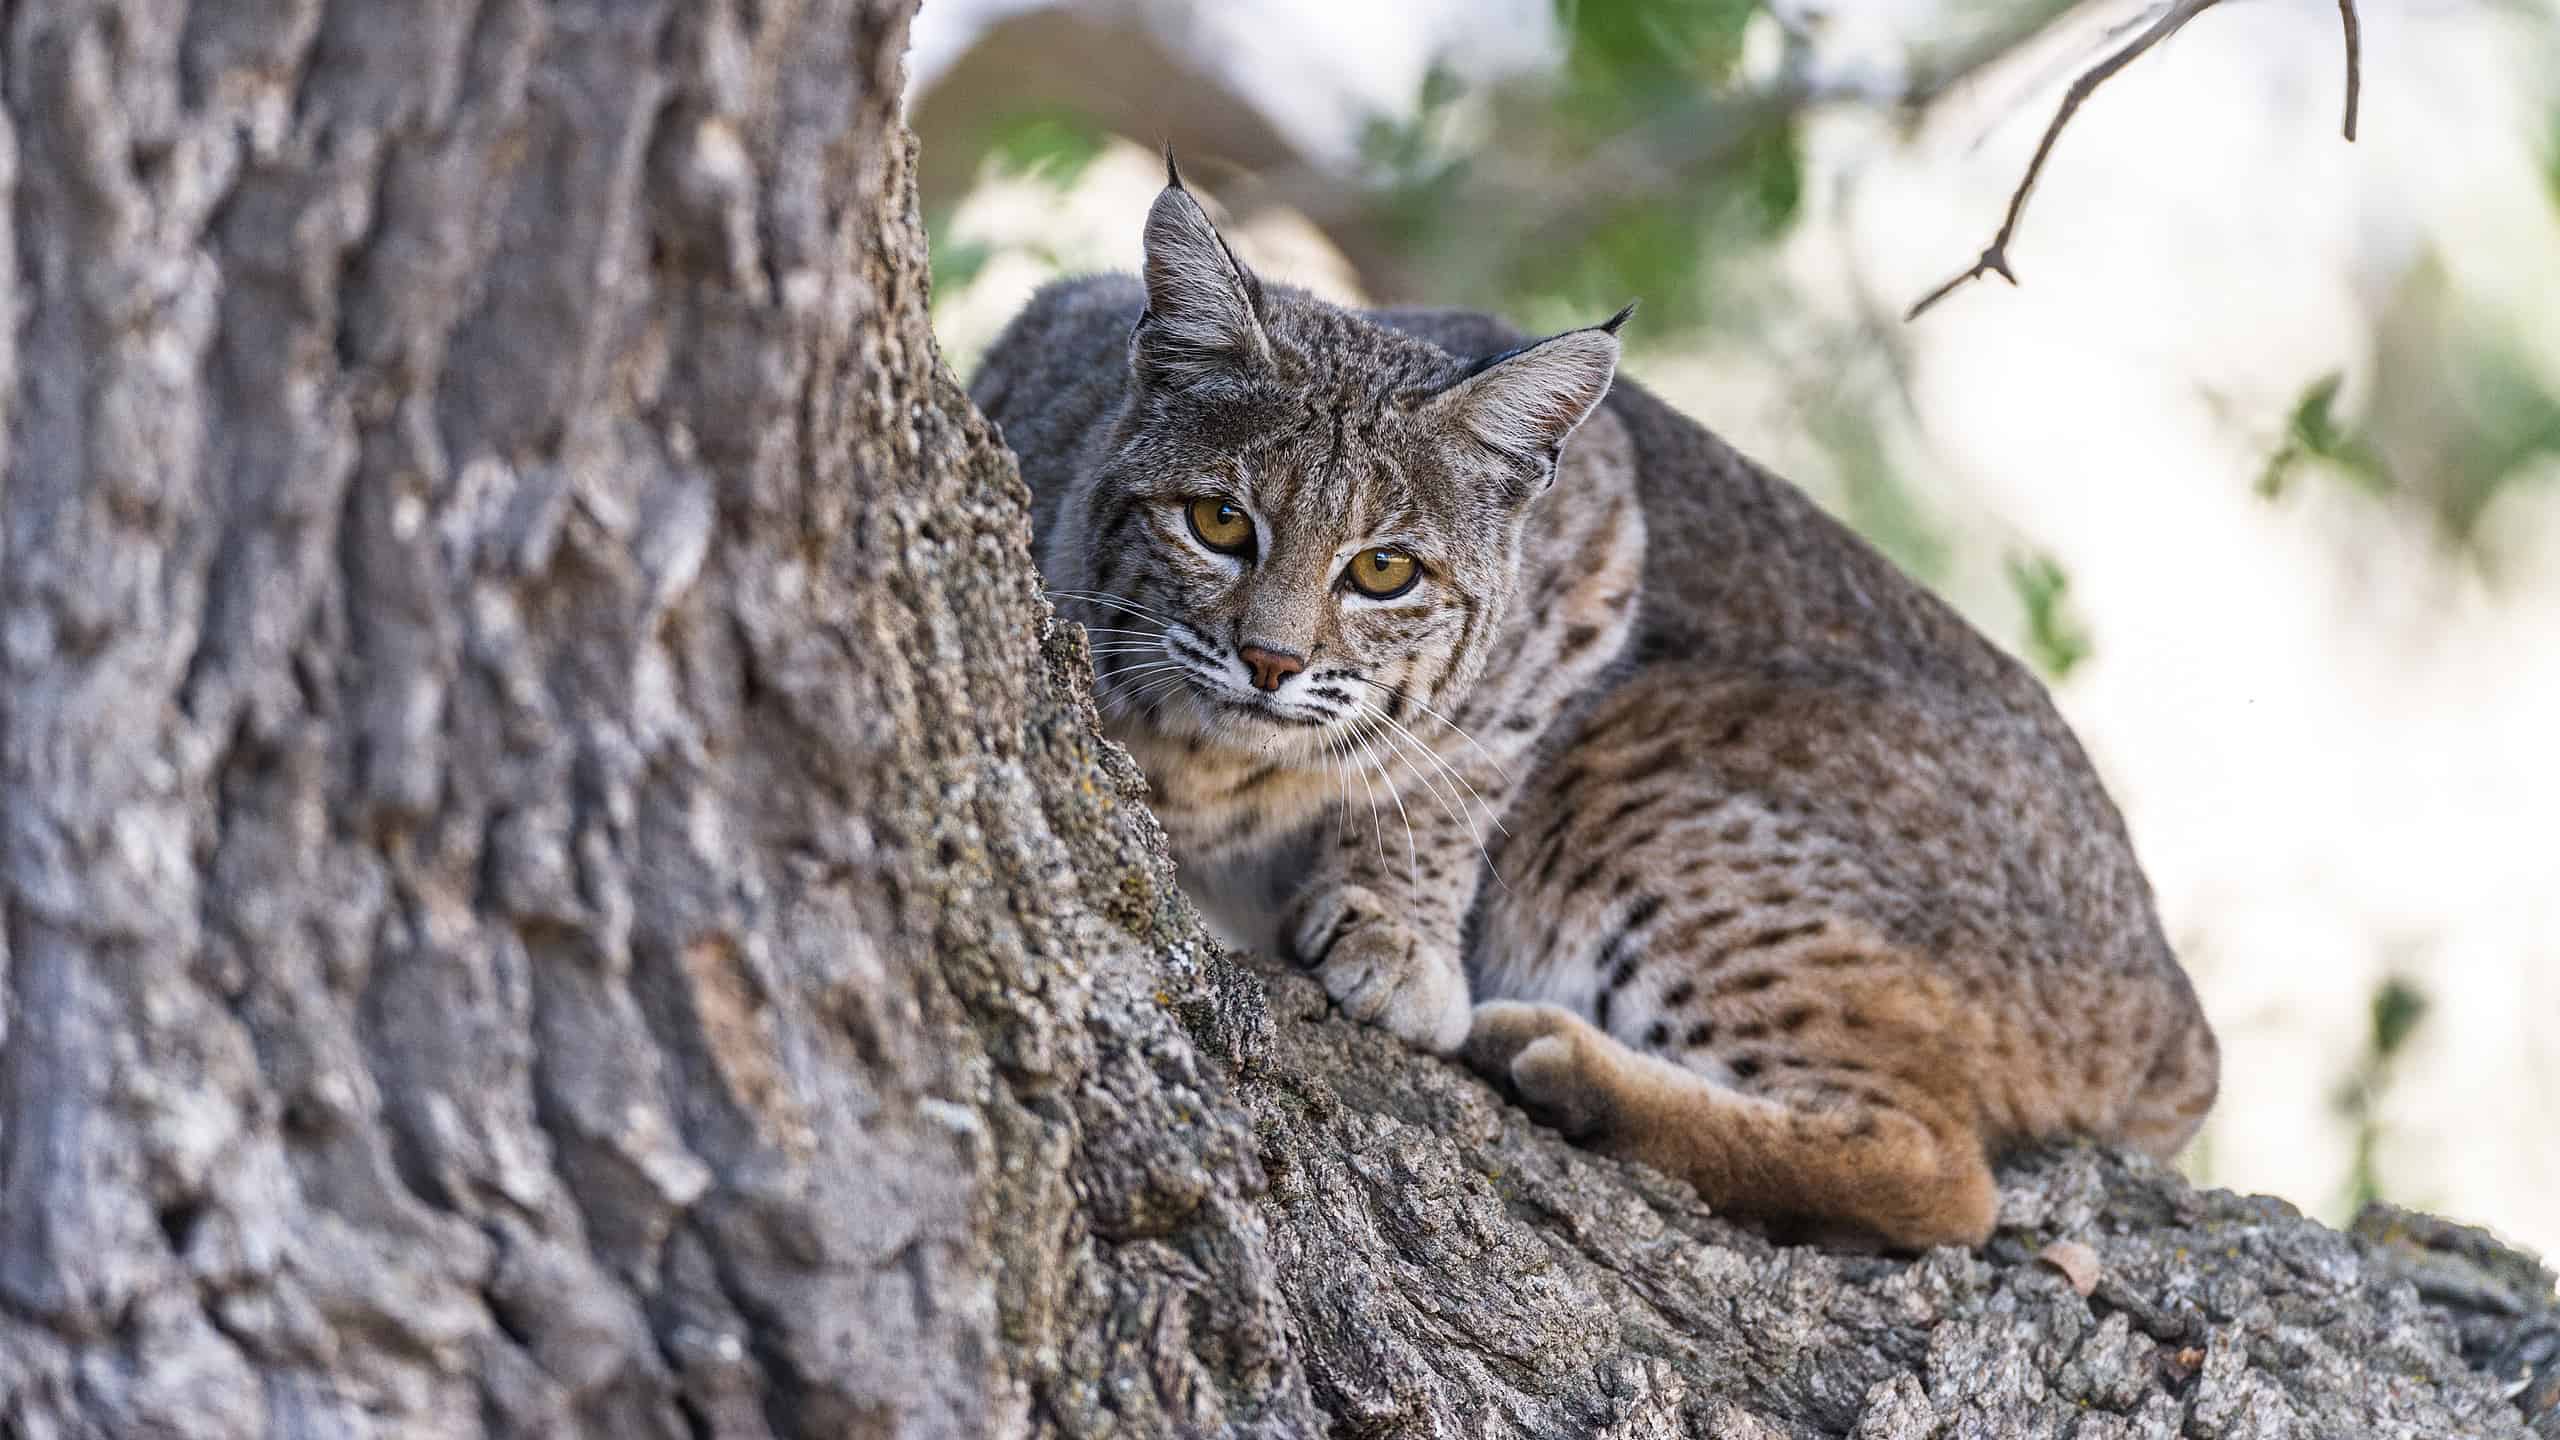 This bobcat climbed an oak tree to better view its hunting grounds in central California.